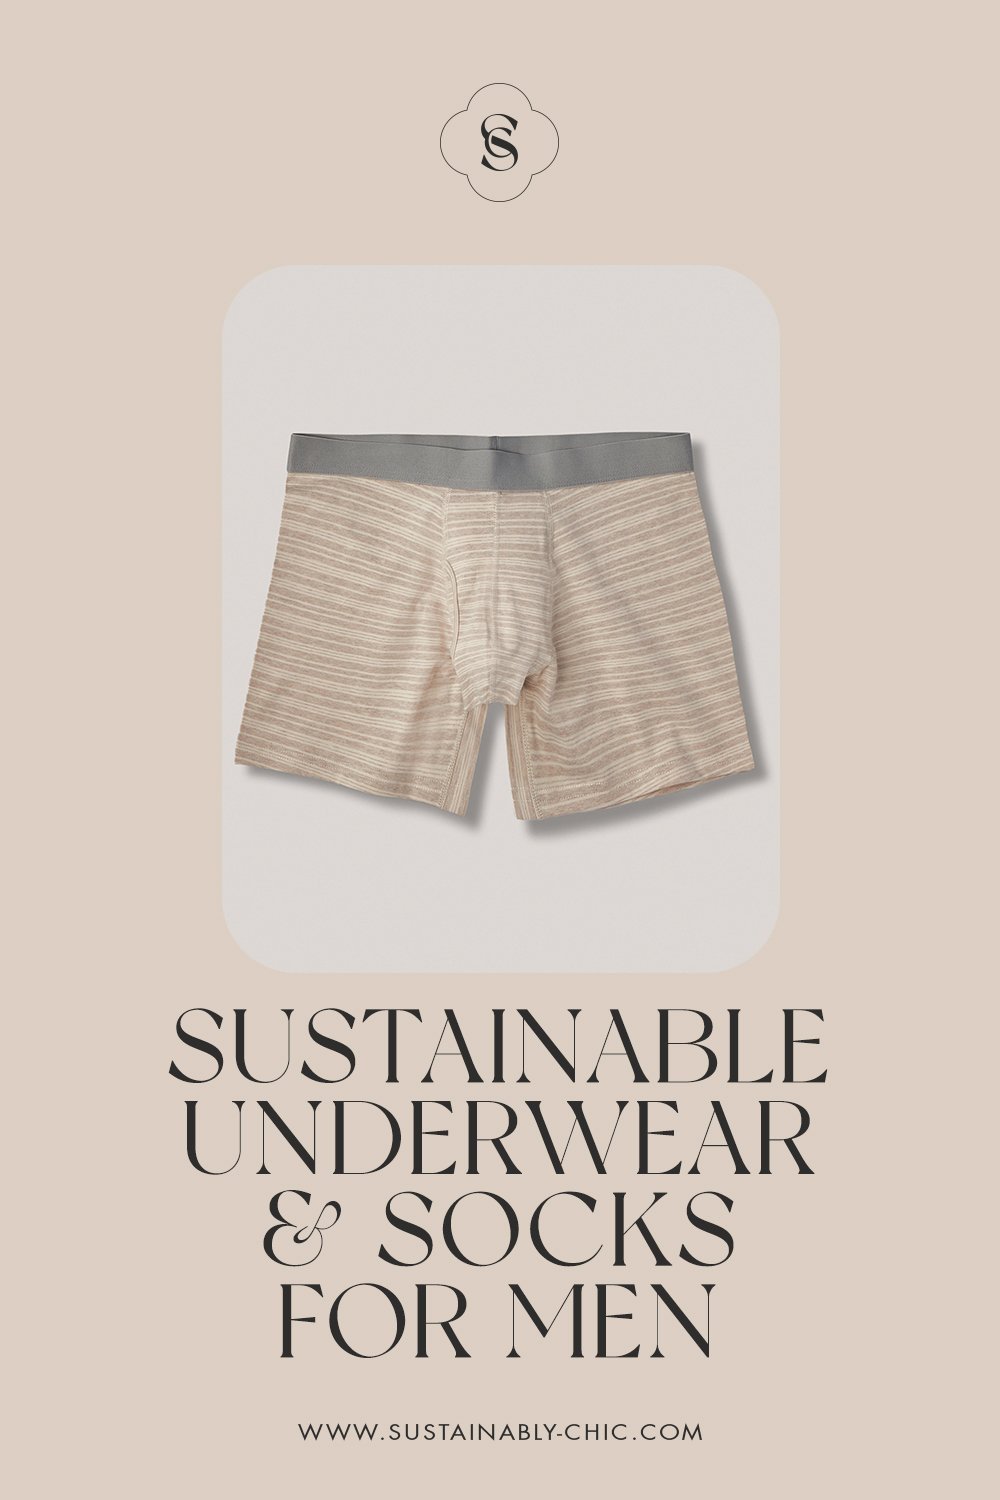 9 Sustainable Men's Sock and Underwear Brands For All Day Comfort